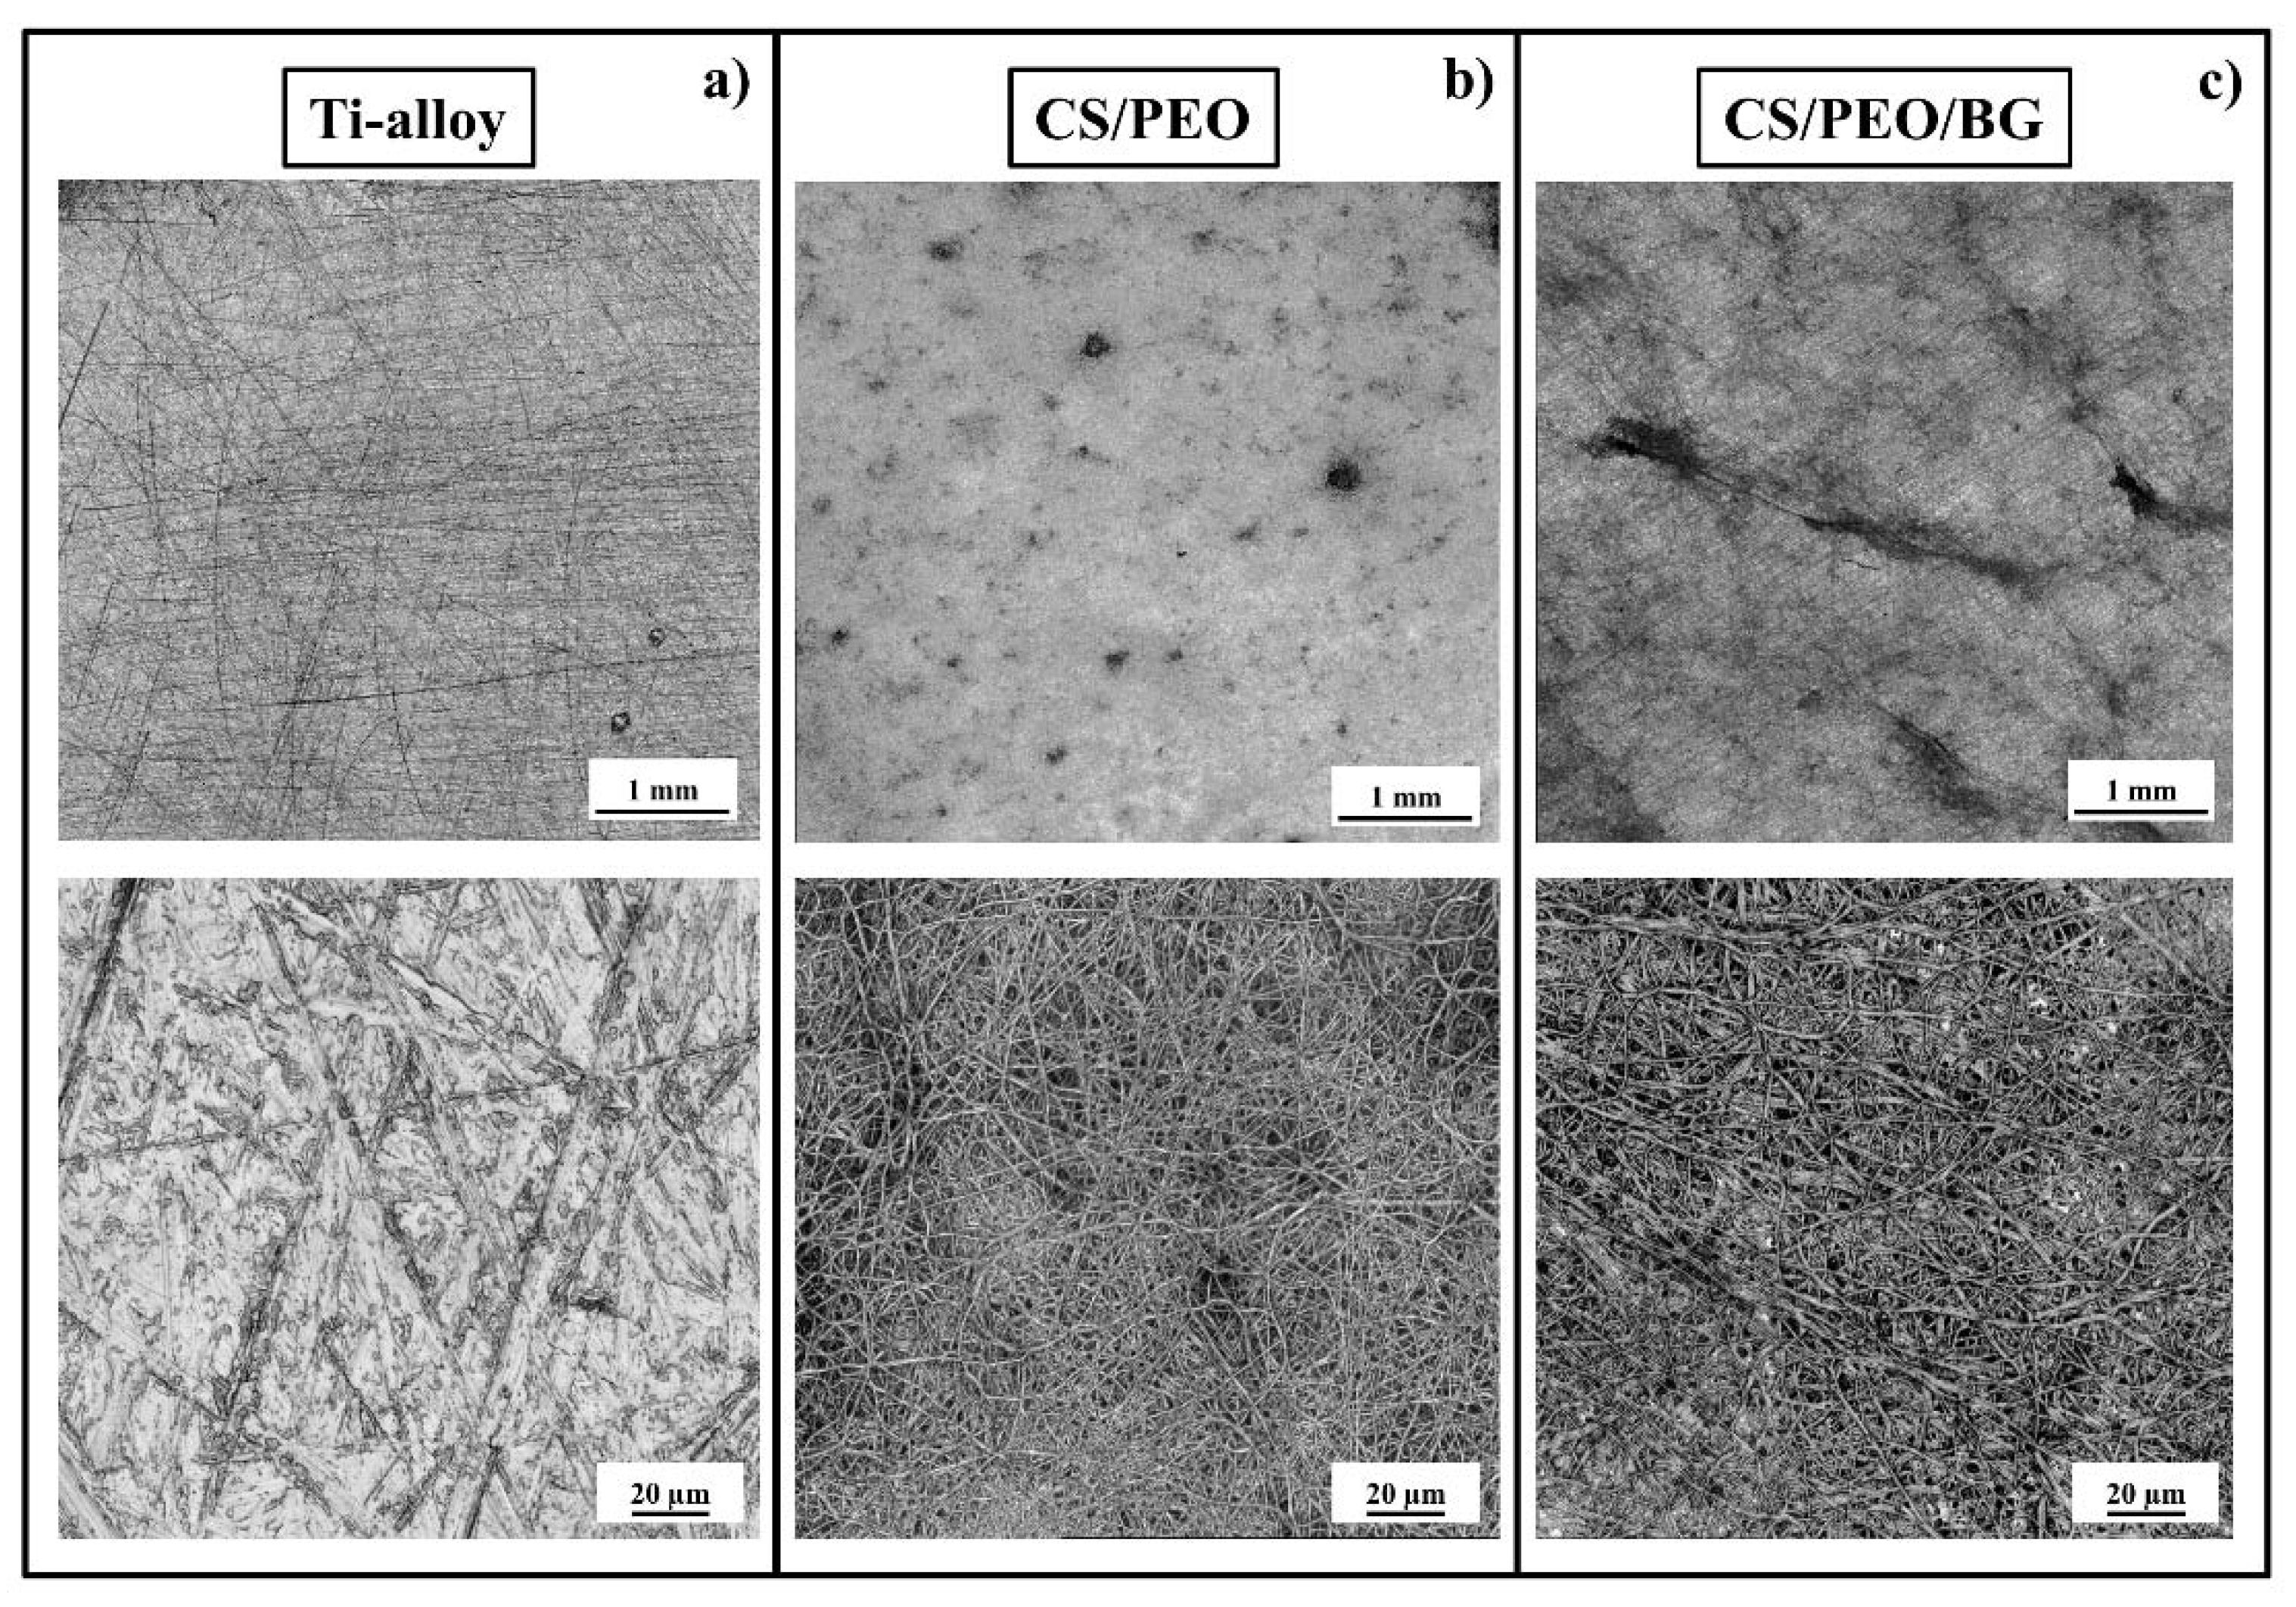 Applied Sciences Free Full Text Antibacterial And Osteoconductive Effects Of Chitosan Polyethylene Oxide Peo Bioactive Glass Nanofibers For Orthopedic Applications Html